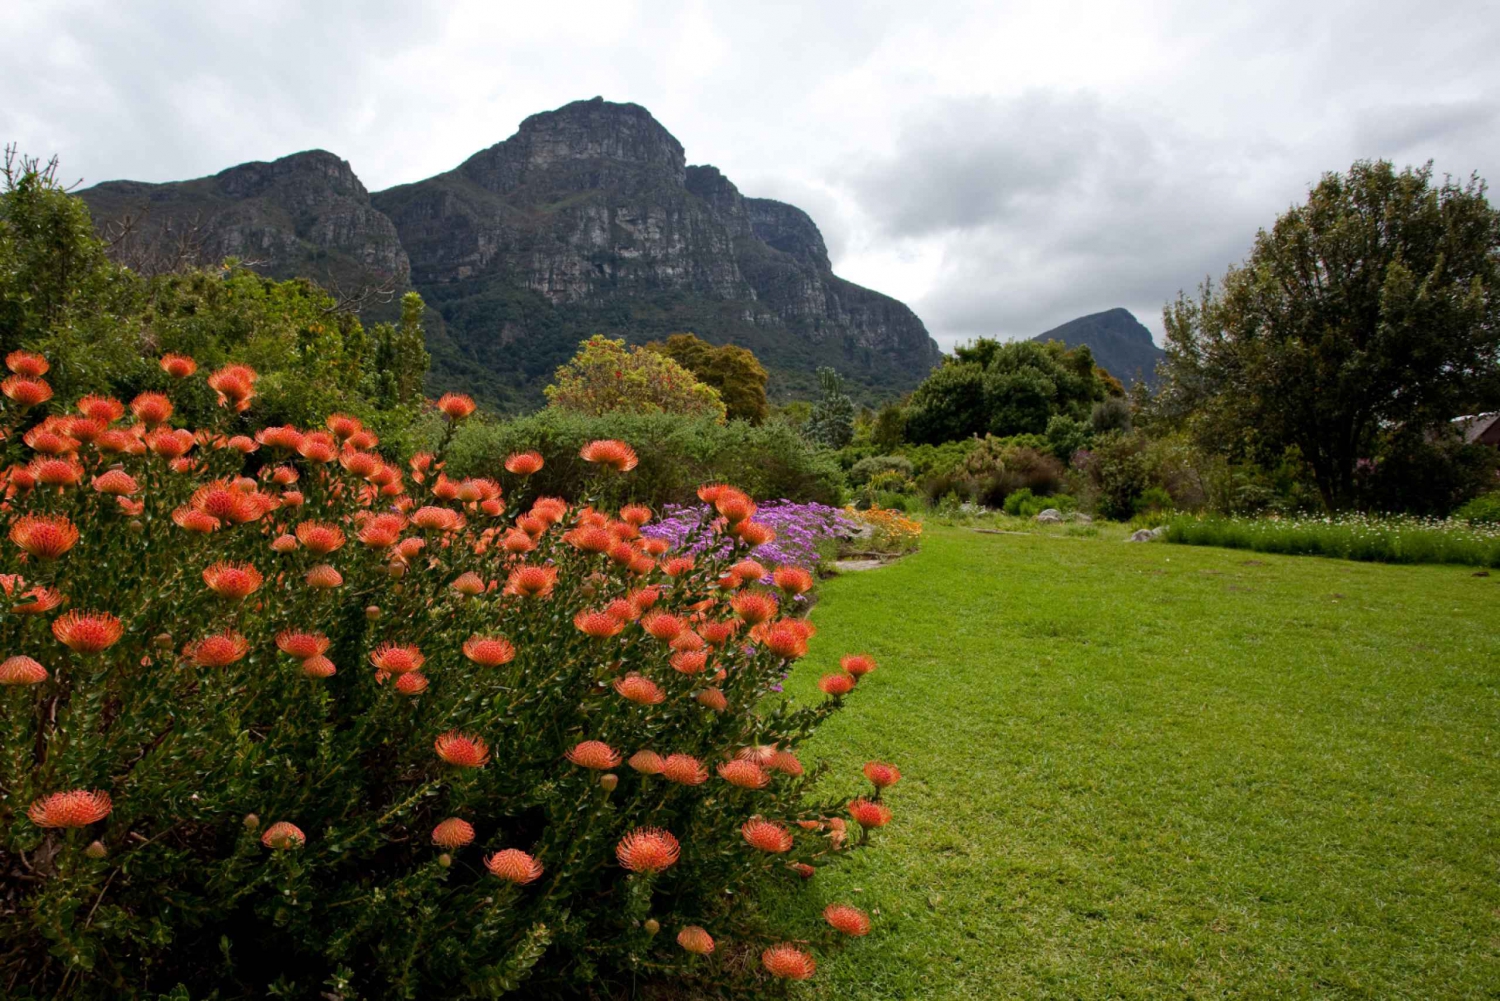 Cape Peninsula Full-Day Tour from Cape Town